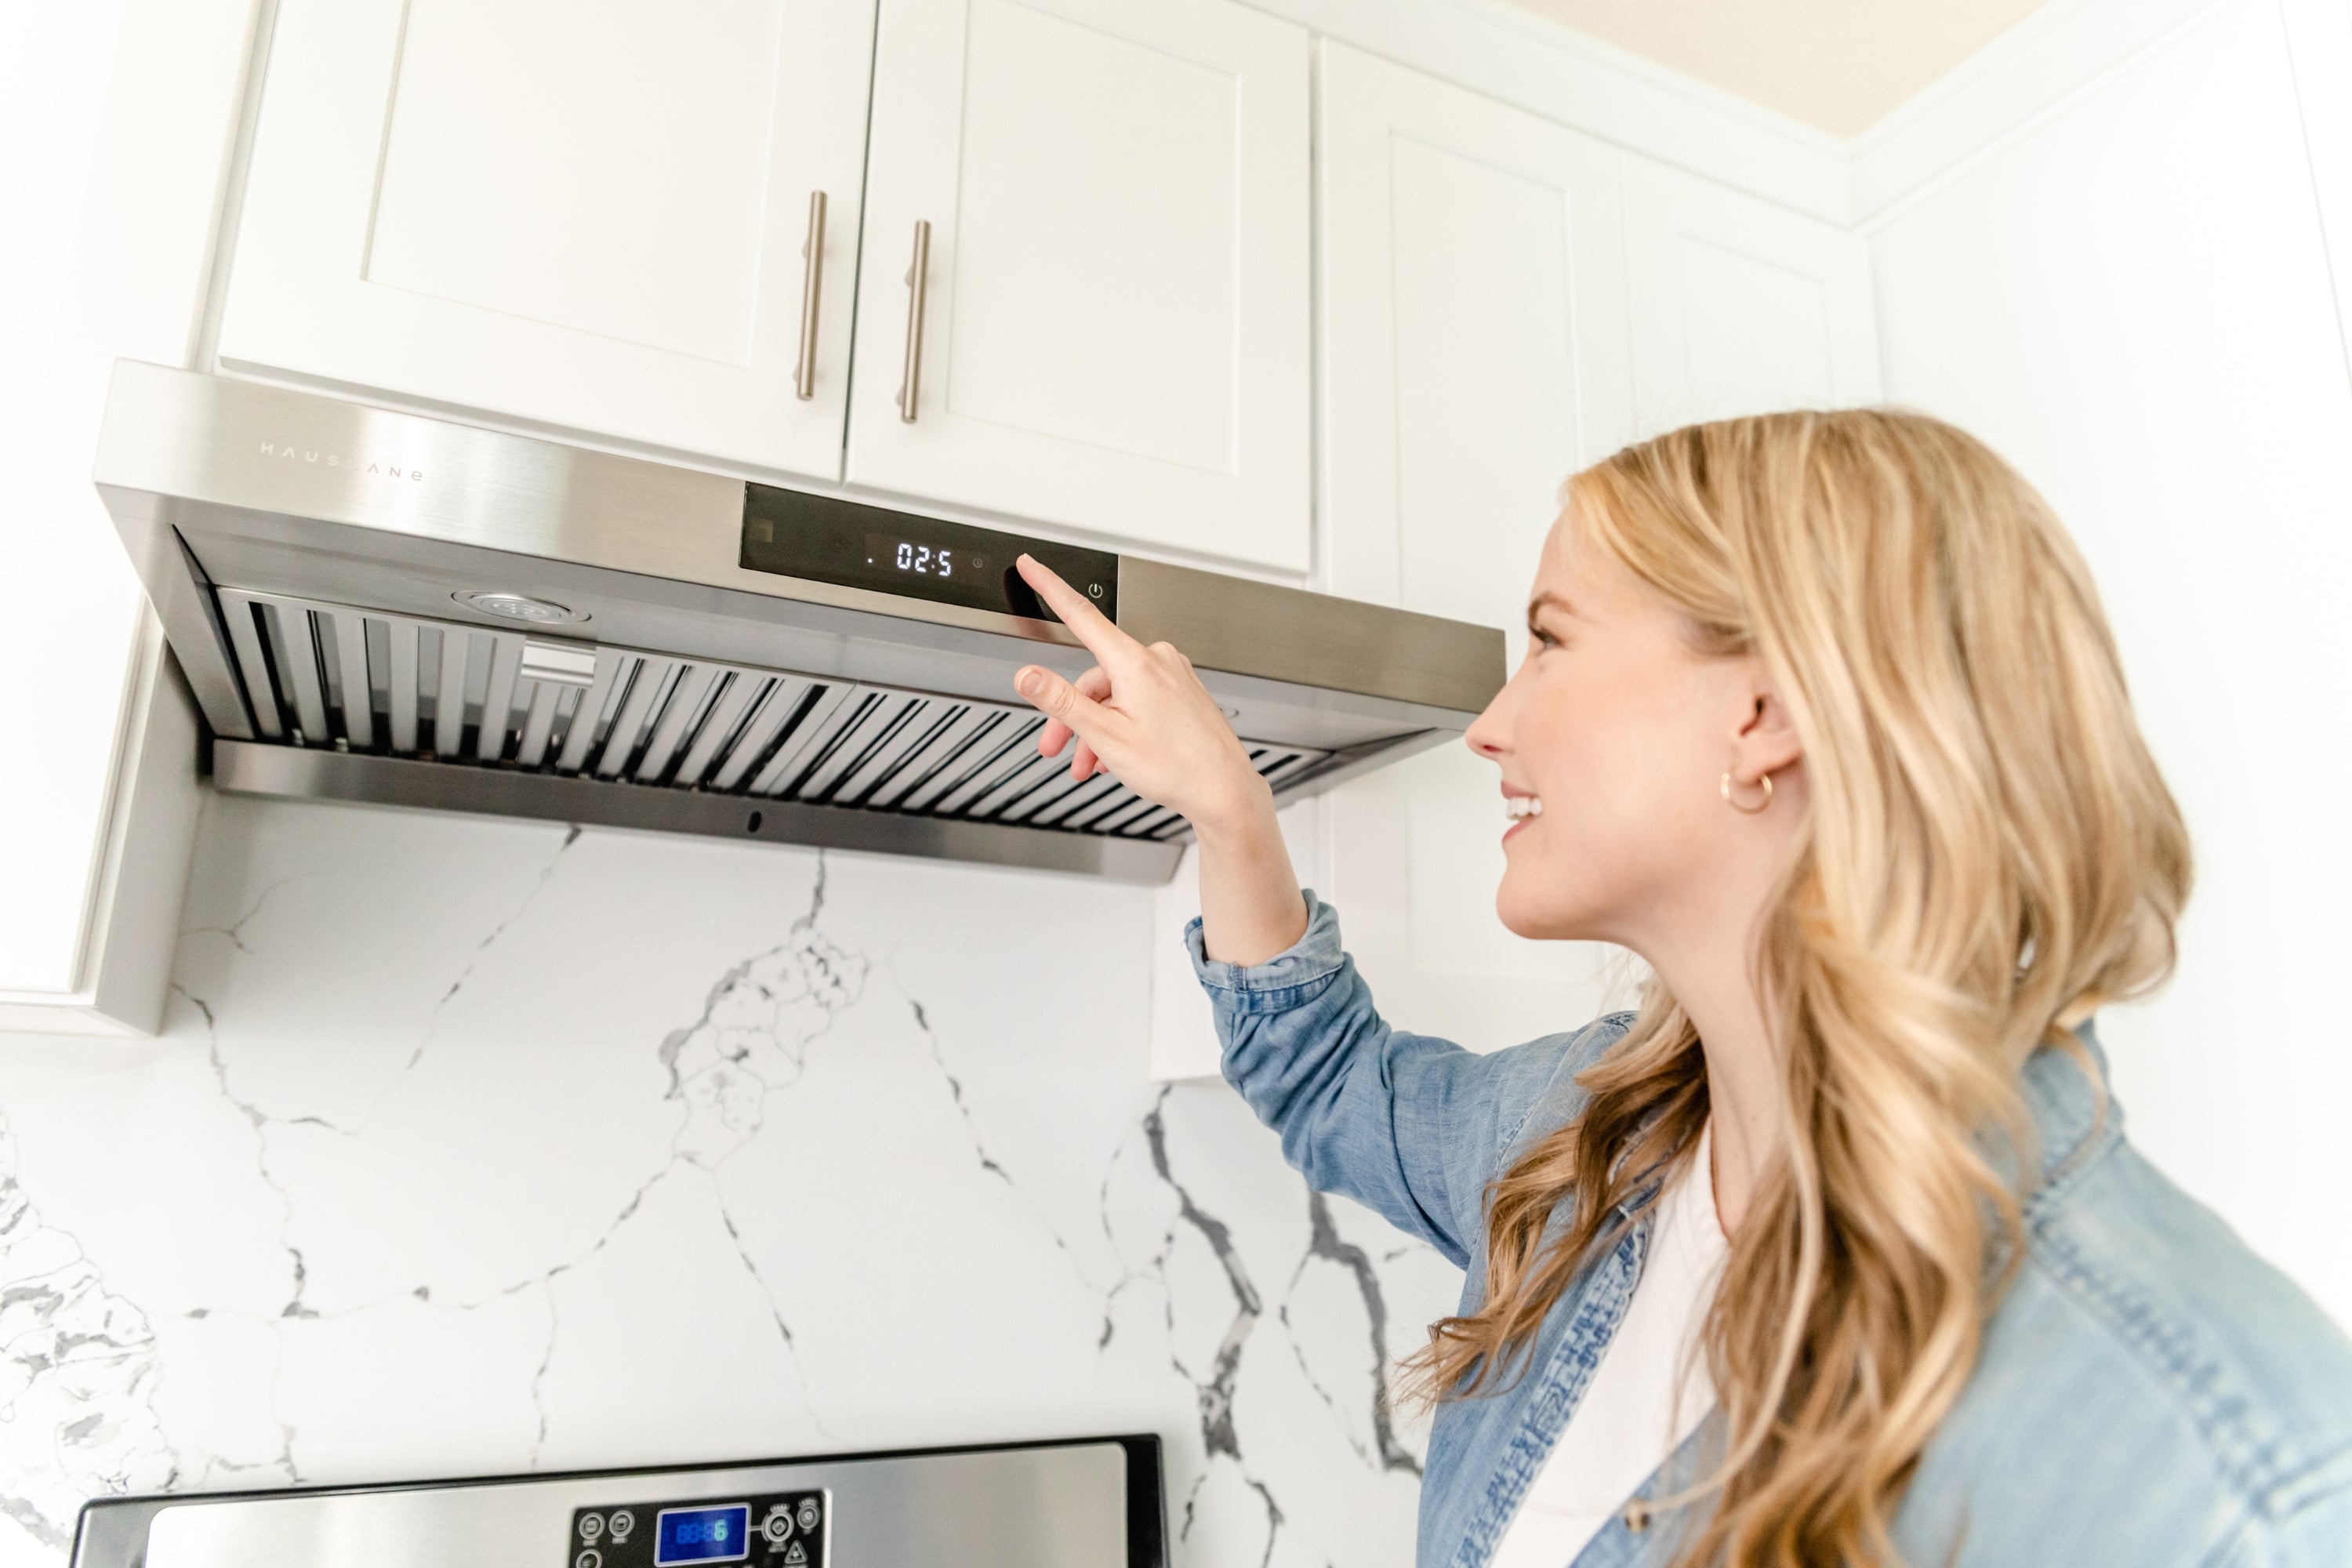 How to Choose a Ventilation Hood